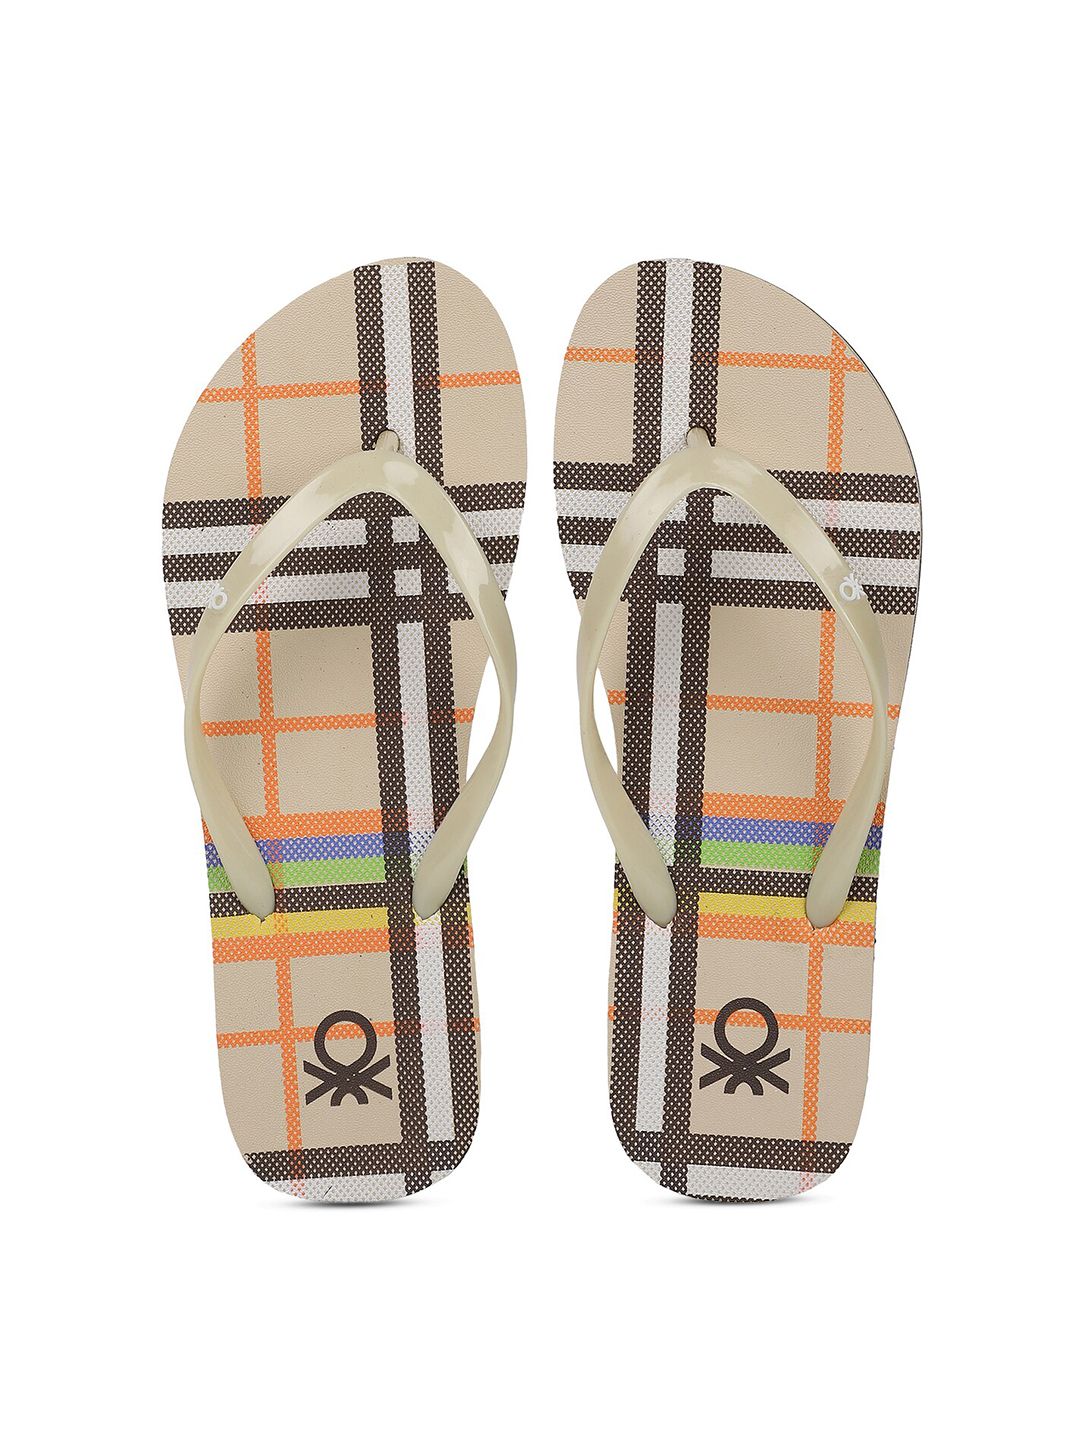 United Colors of Benetton Women Khaki & Black Checked Printed Rubber Thong Flip-Flops Price in India